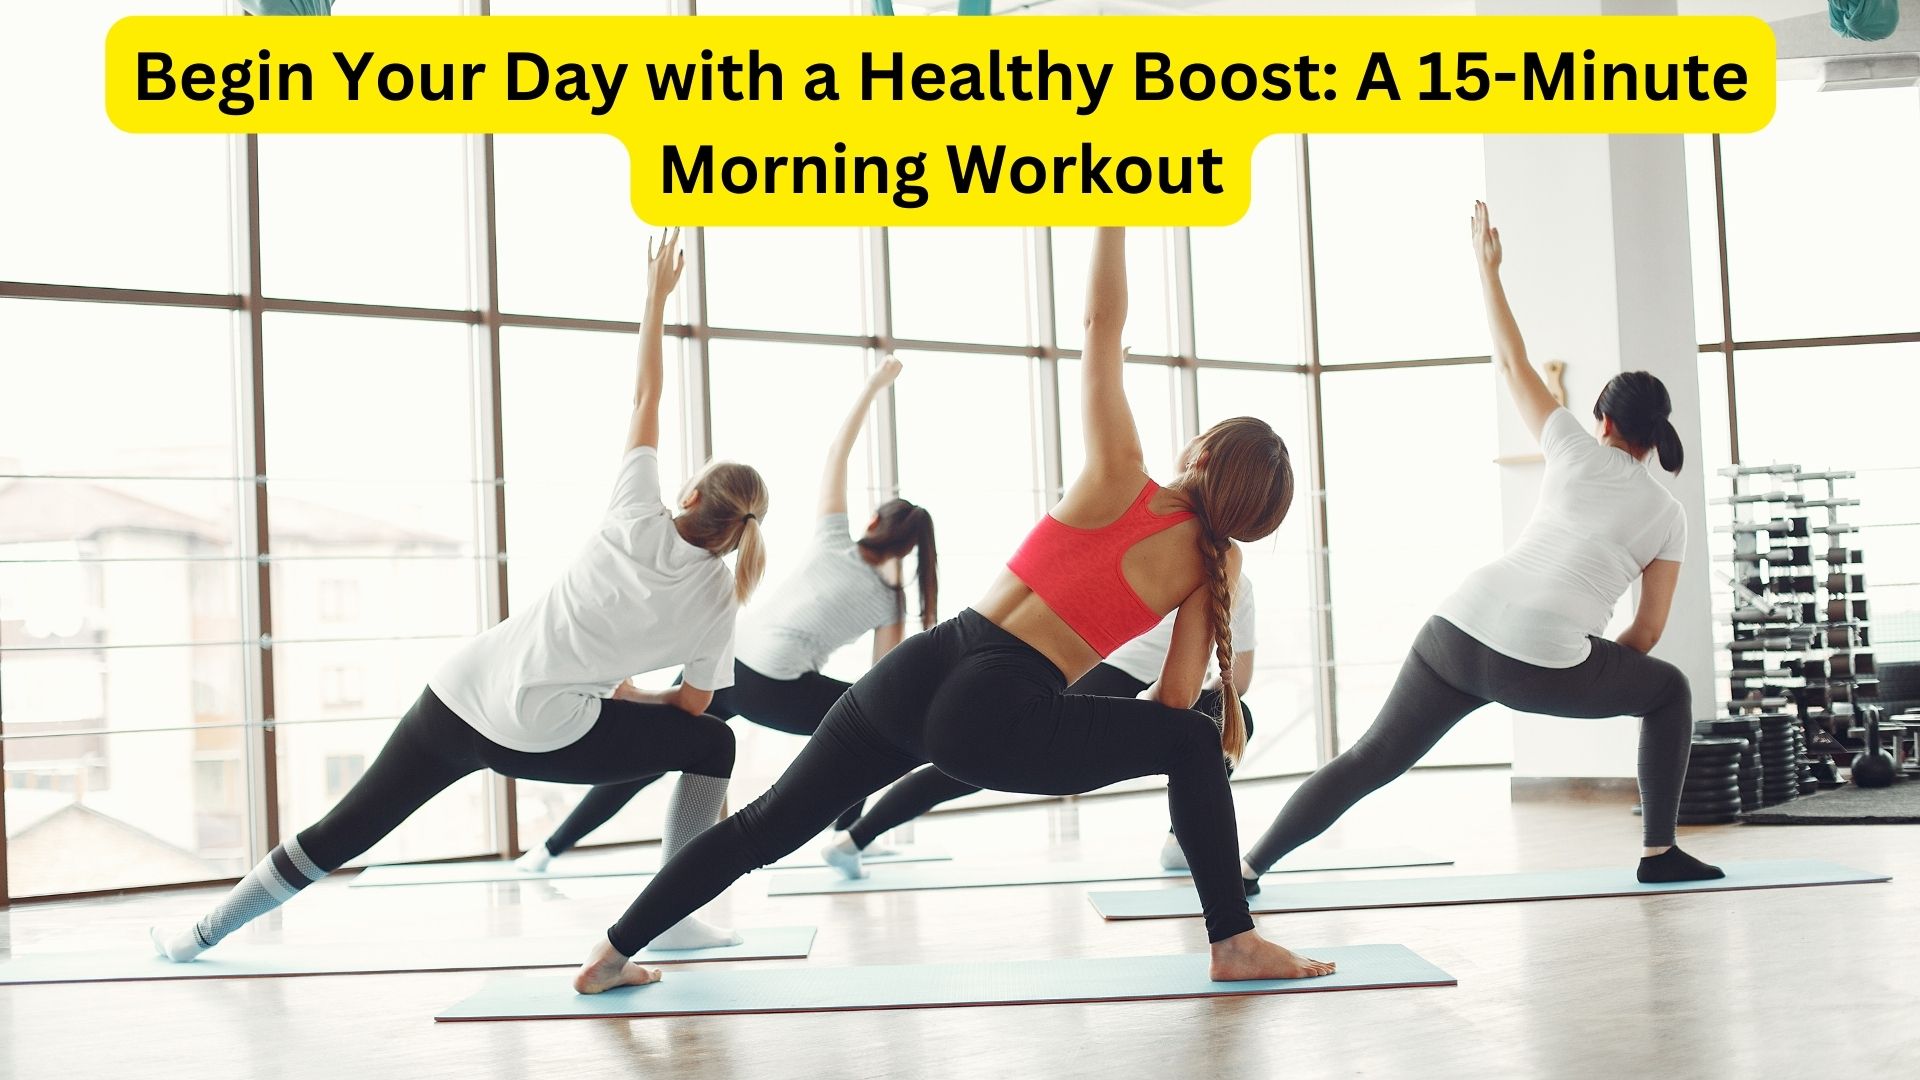 Begin Your Day with a Healthy Boost: A 15-Minute Morning Workout